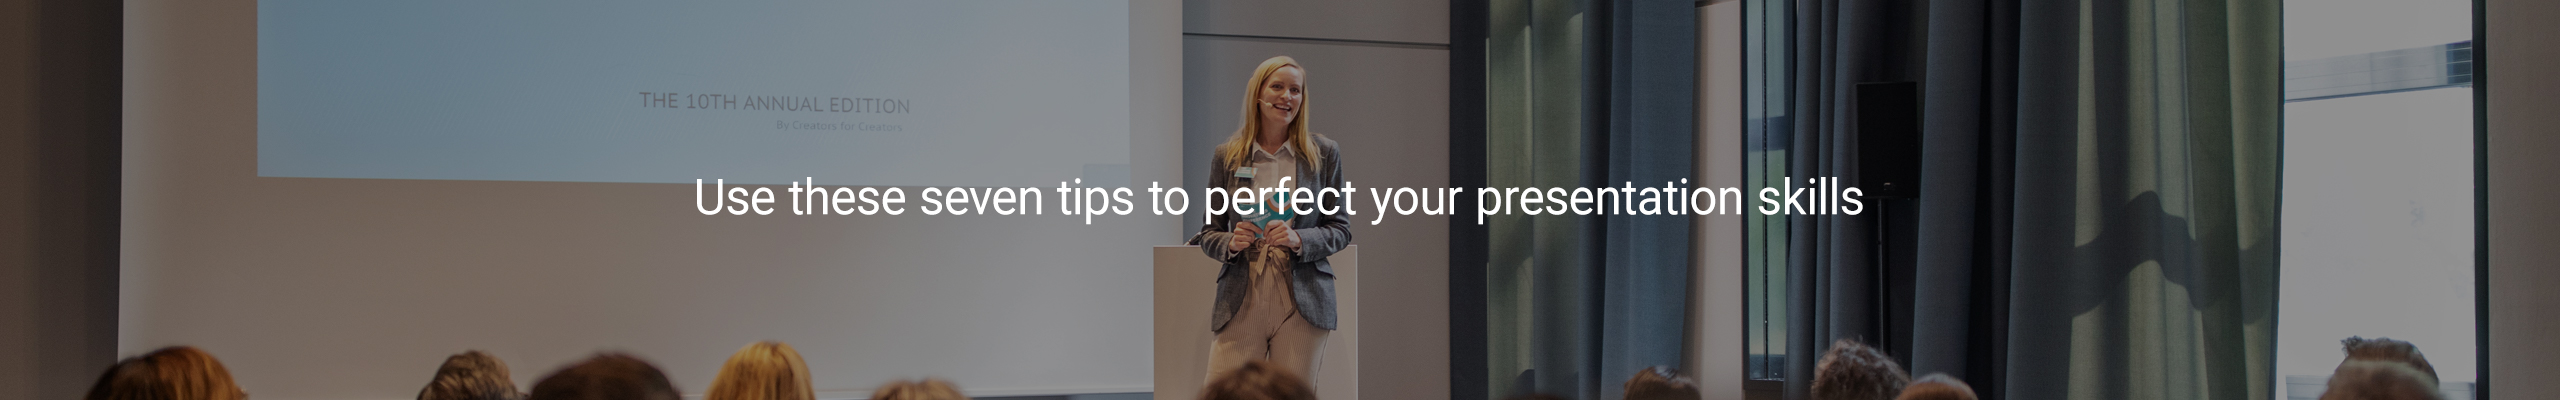 importance of presentation skills in business